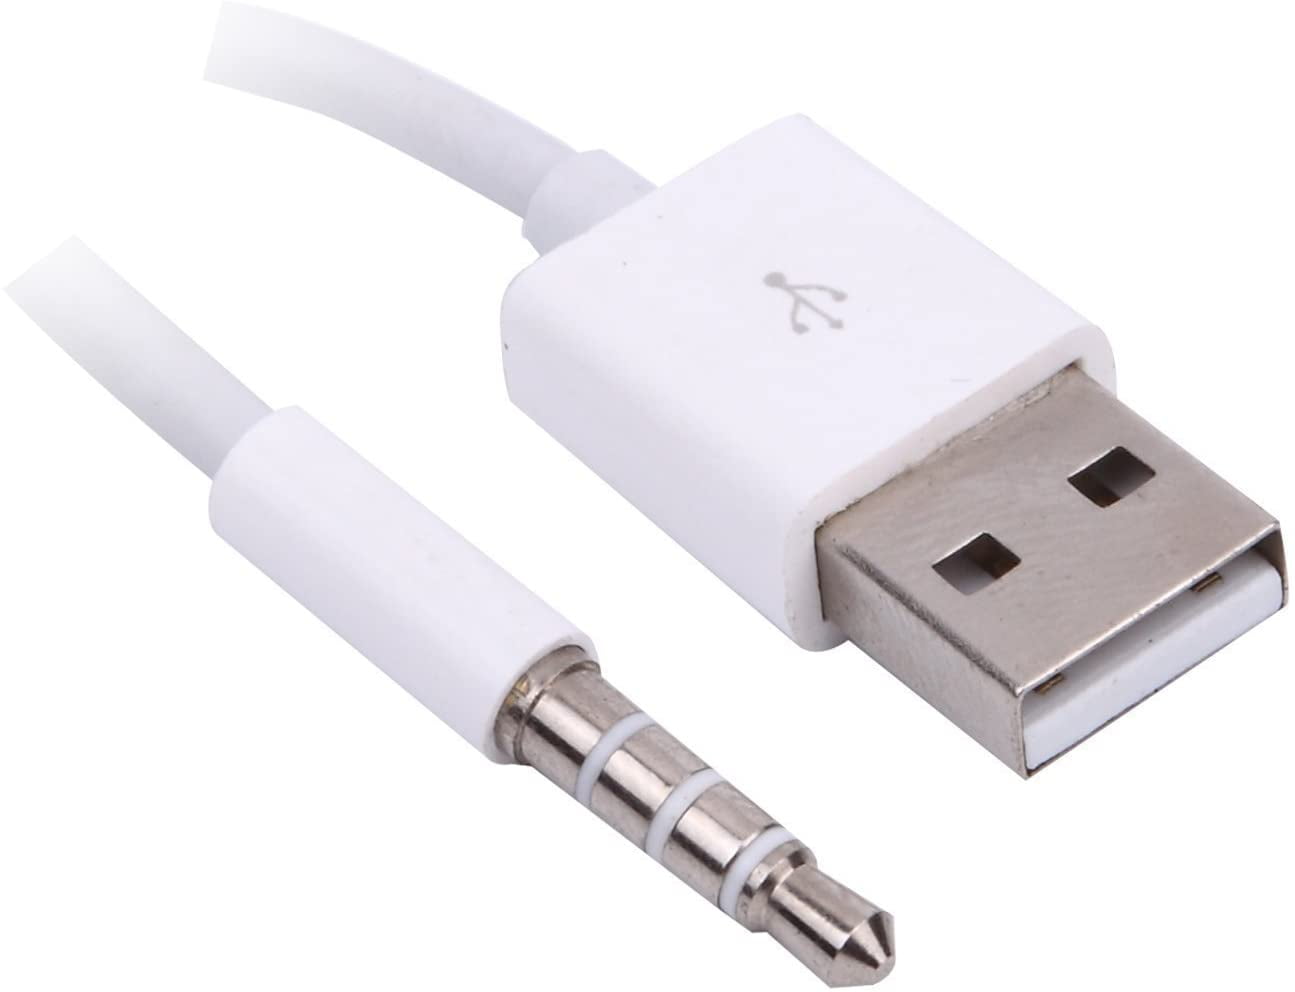 4 inch usb cable